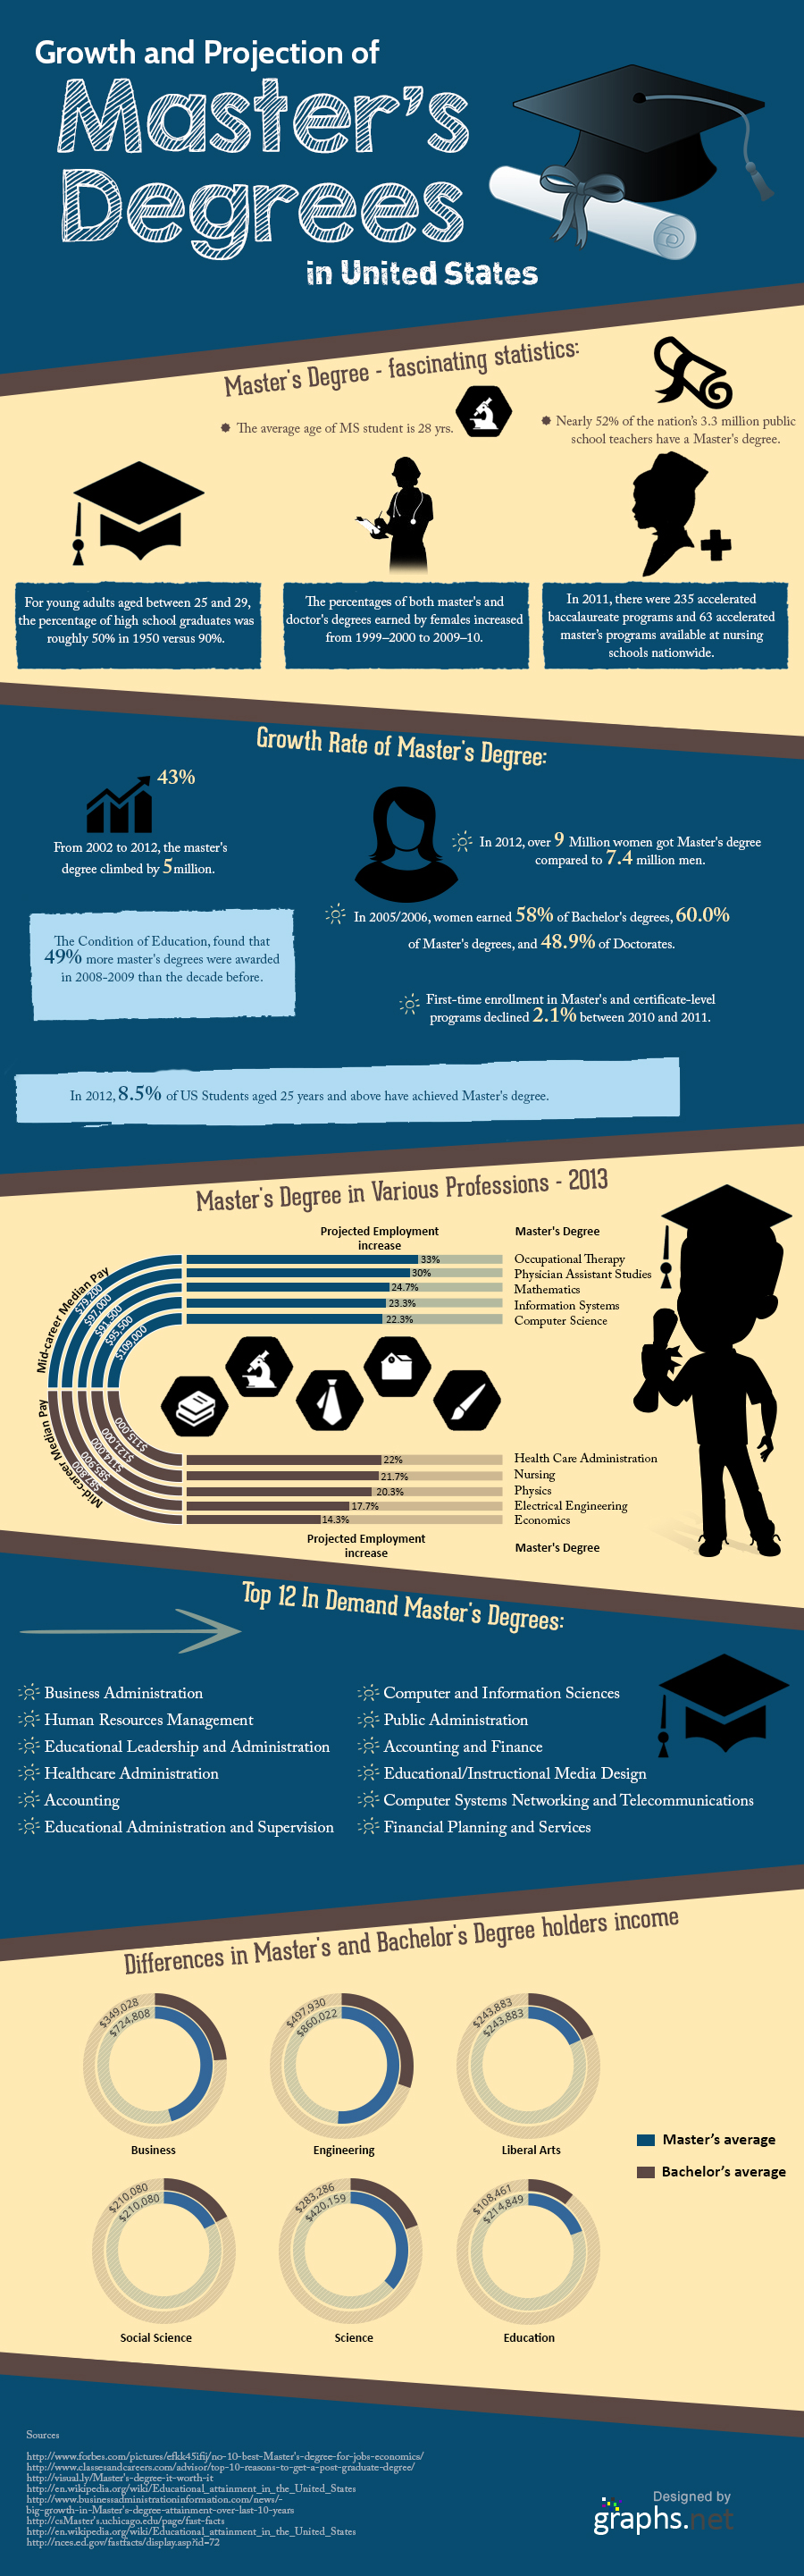 Projection of Master's Degrees in United States